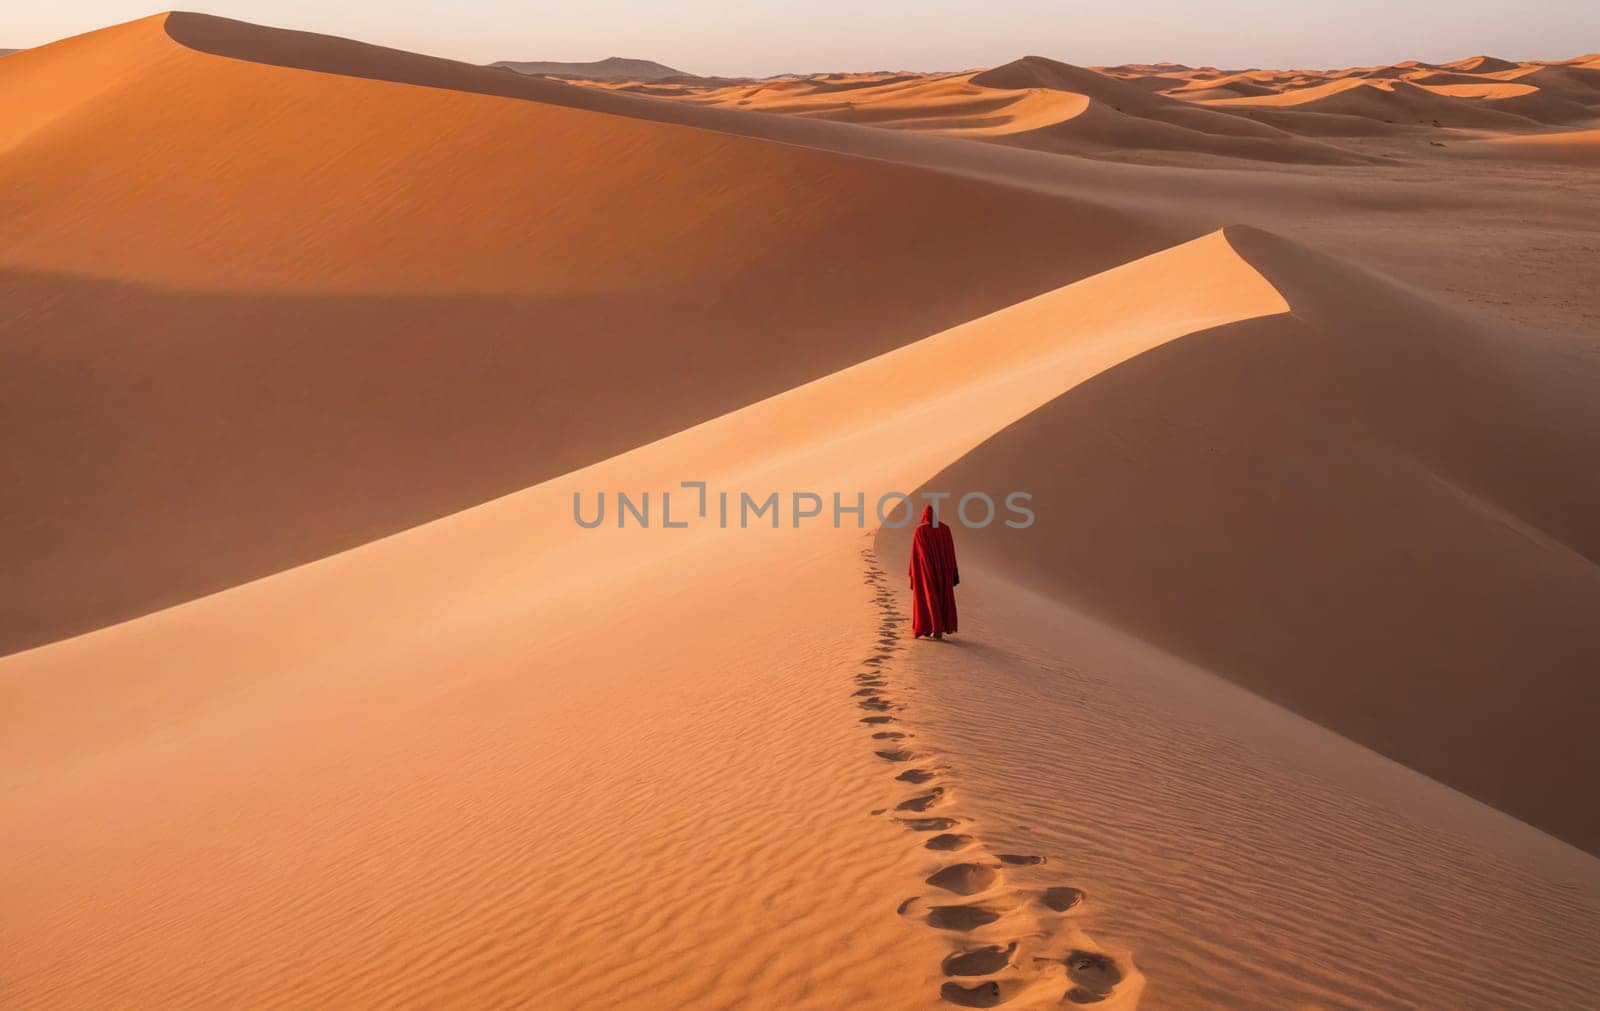 a person in a red robe is walking on top of a sand dune in the desert by Andre1ns